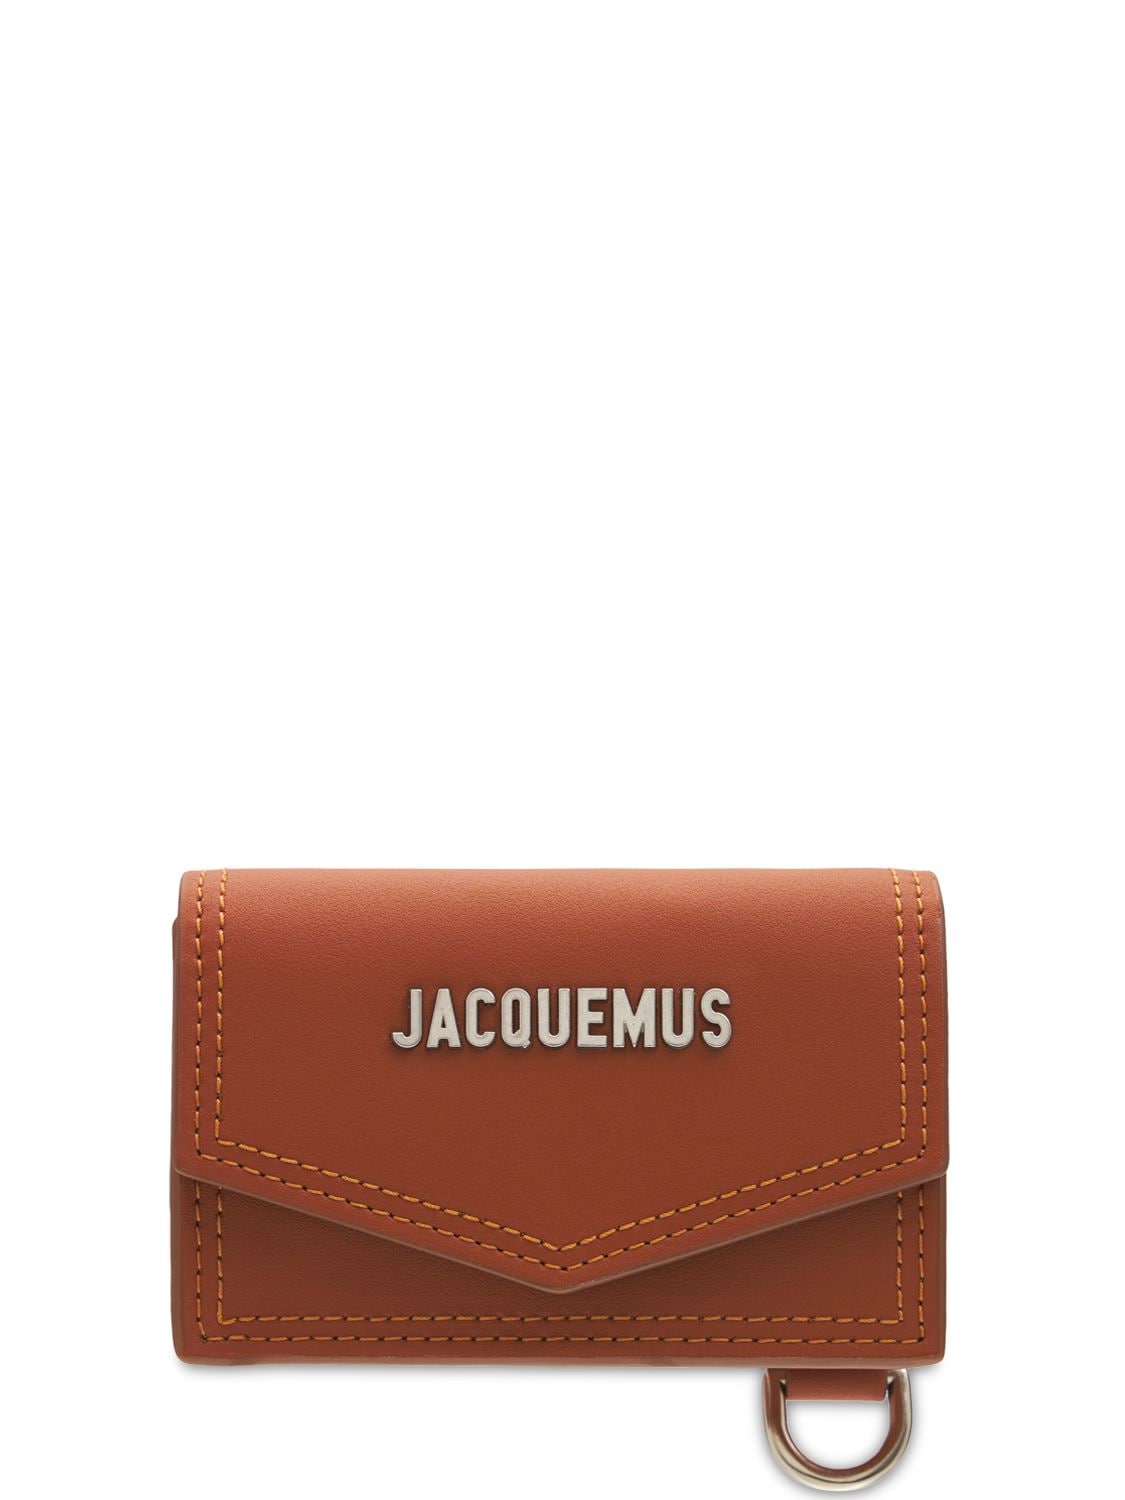 Jacquemus Le Porte Azur Leather Crossbody Bag In Brown